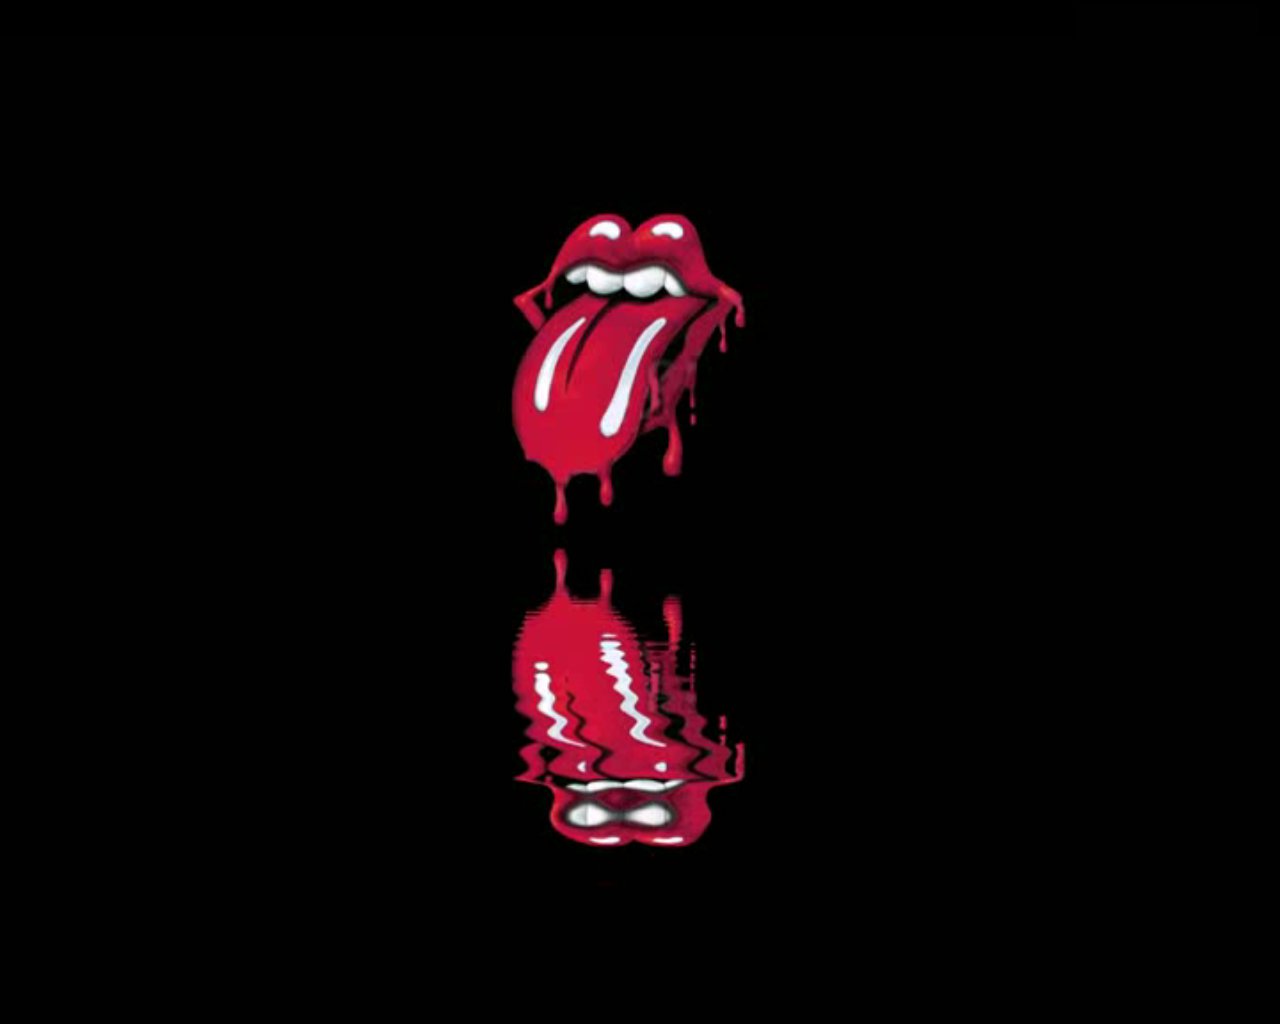 Rolling Stones by vippe1 on